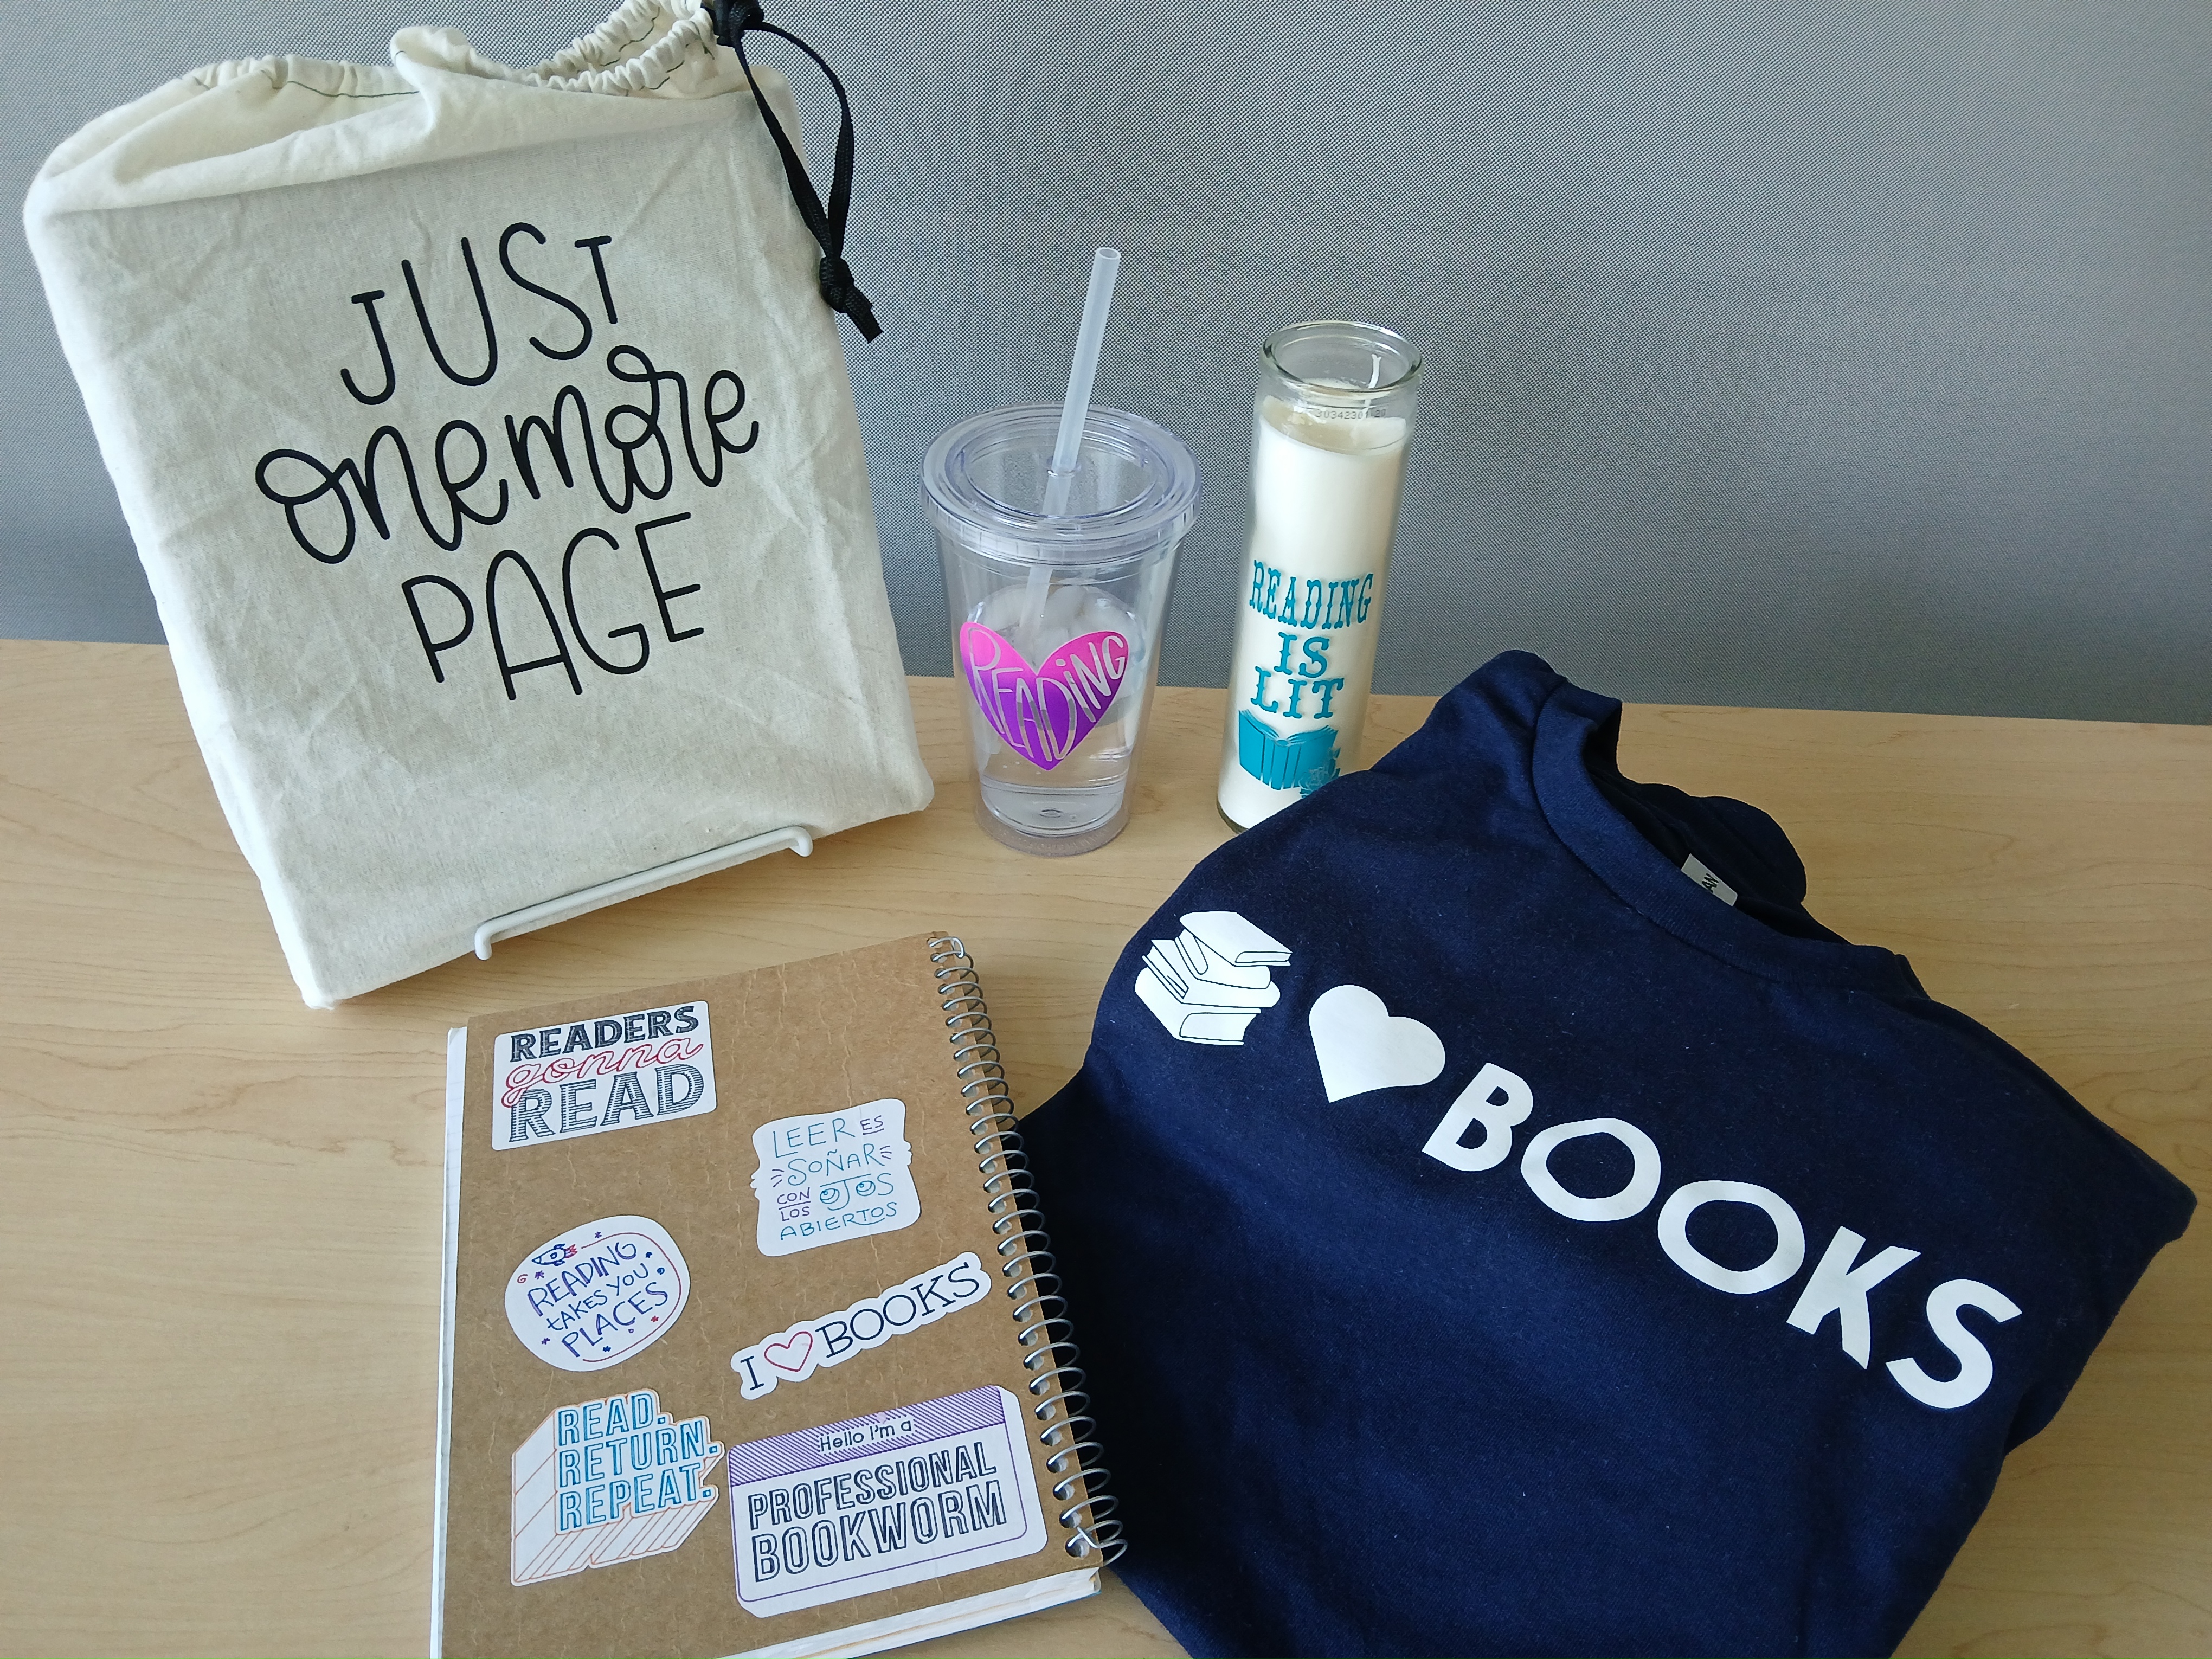 A variety of crafted items promoting reading: a canvas bag, a reuable water cup with straw, a tall candle in glass, a navy blue Tshirt, and a